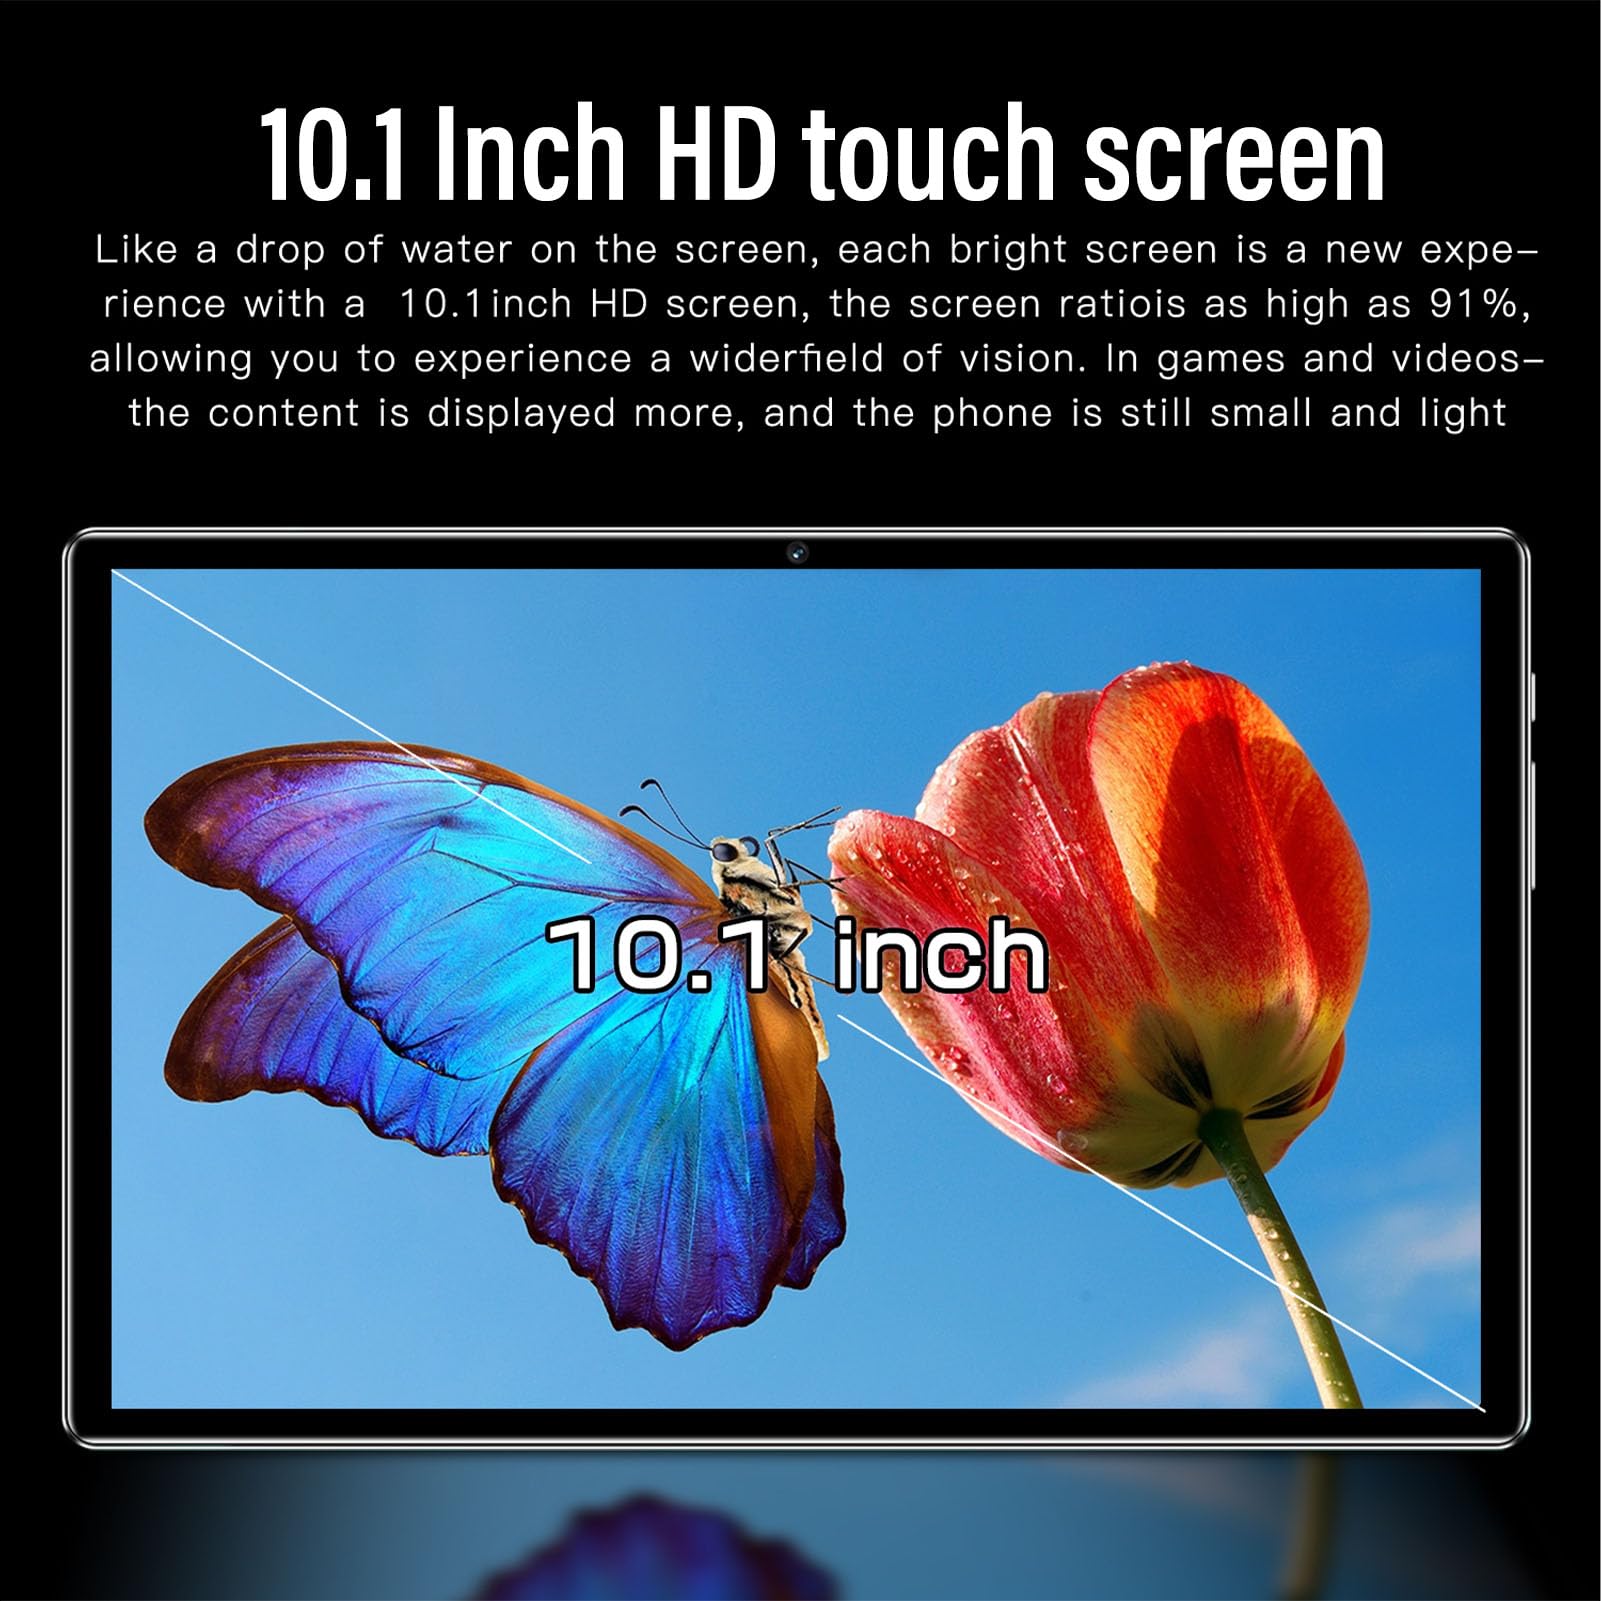 10.1In 2 in 1 Android Tablet, LCD FHD Touch Screen, 8GB RAM 256GB ROM, MT6755 Octa Core, 5G WiFi, BT5.0, 4G Calling, Dual SIM Dual Standby, with Case Keyboard (US Plug)